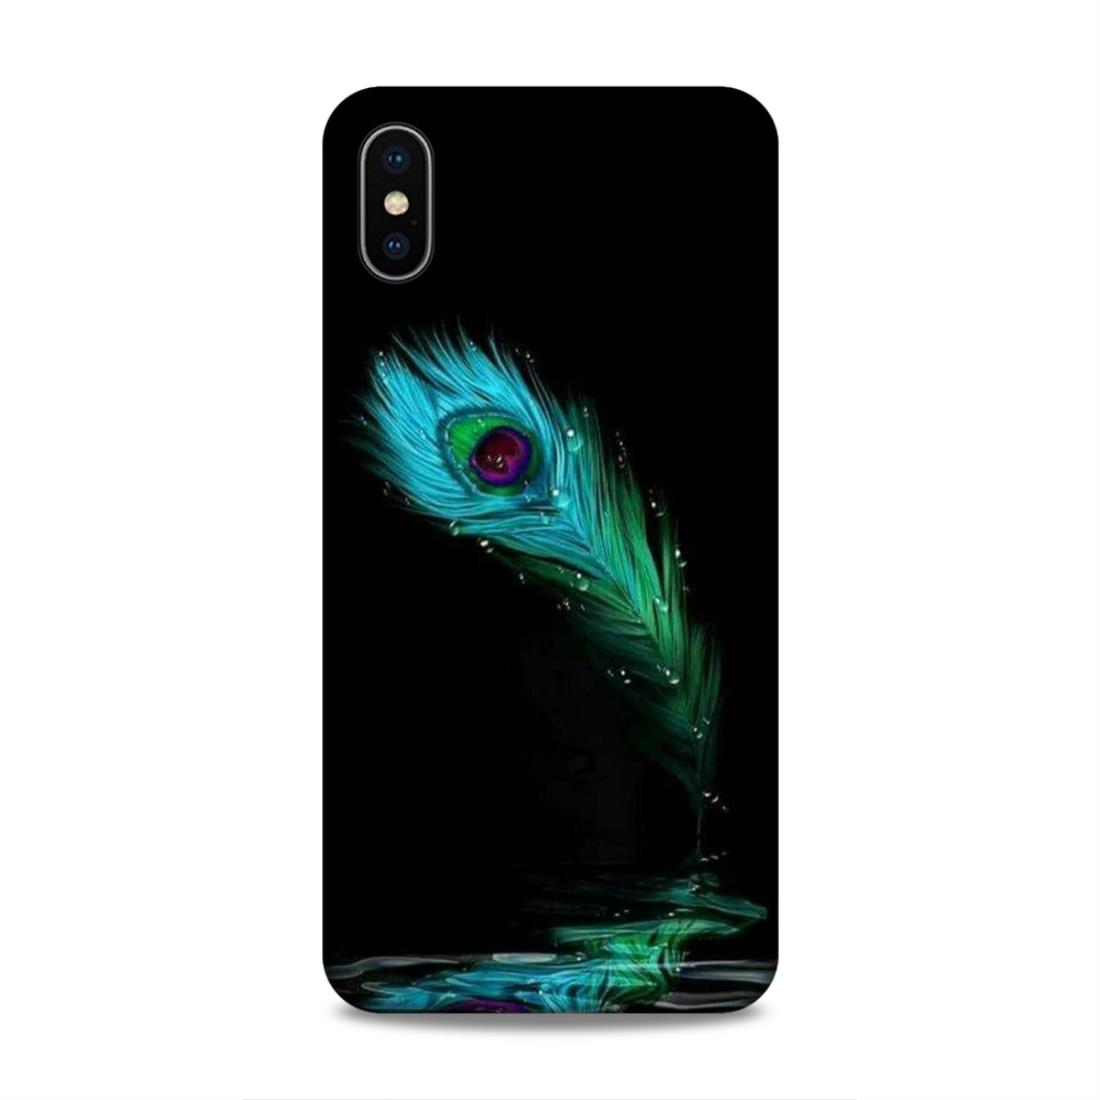 Morpankh Hard Back Case For Apple iPhone XS Max